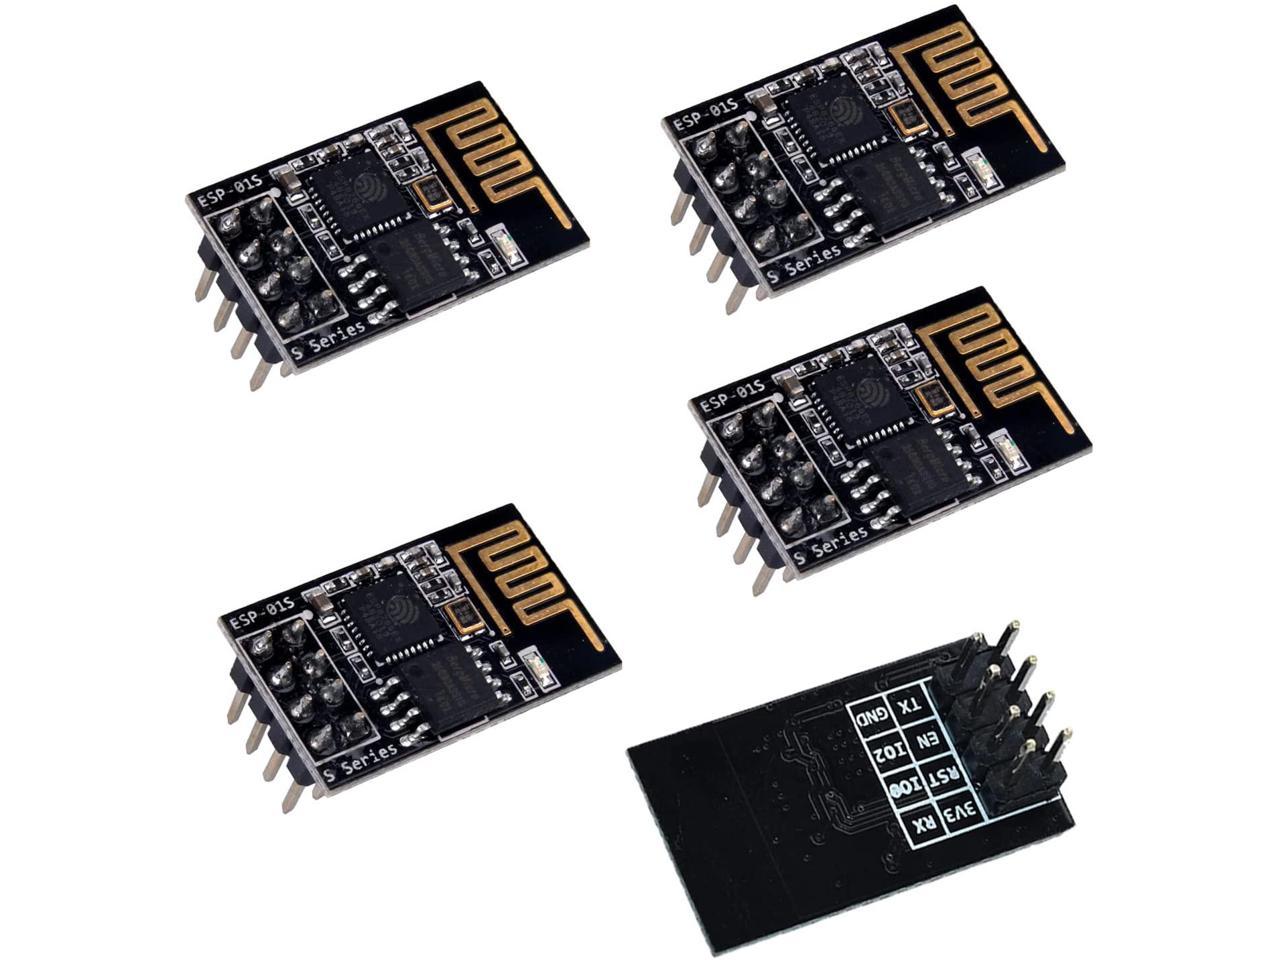 6pcs ESP8266 ESP-01S Serial WiFi Wireless Module AP STA AP+STA Mode with 1MB Flash Compatible with Arduino 